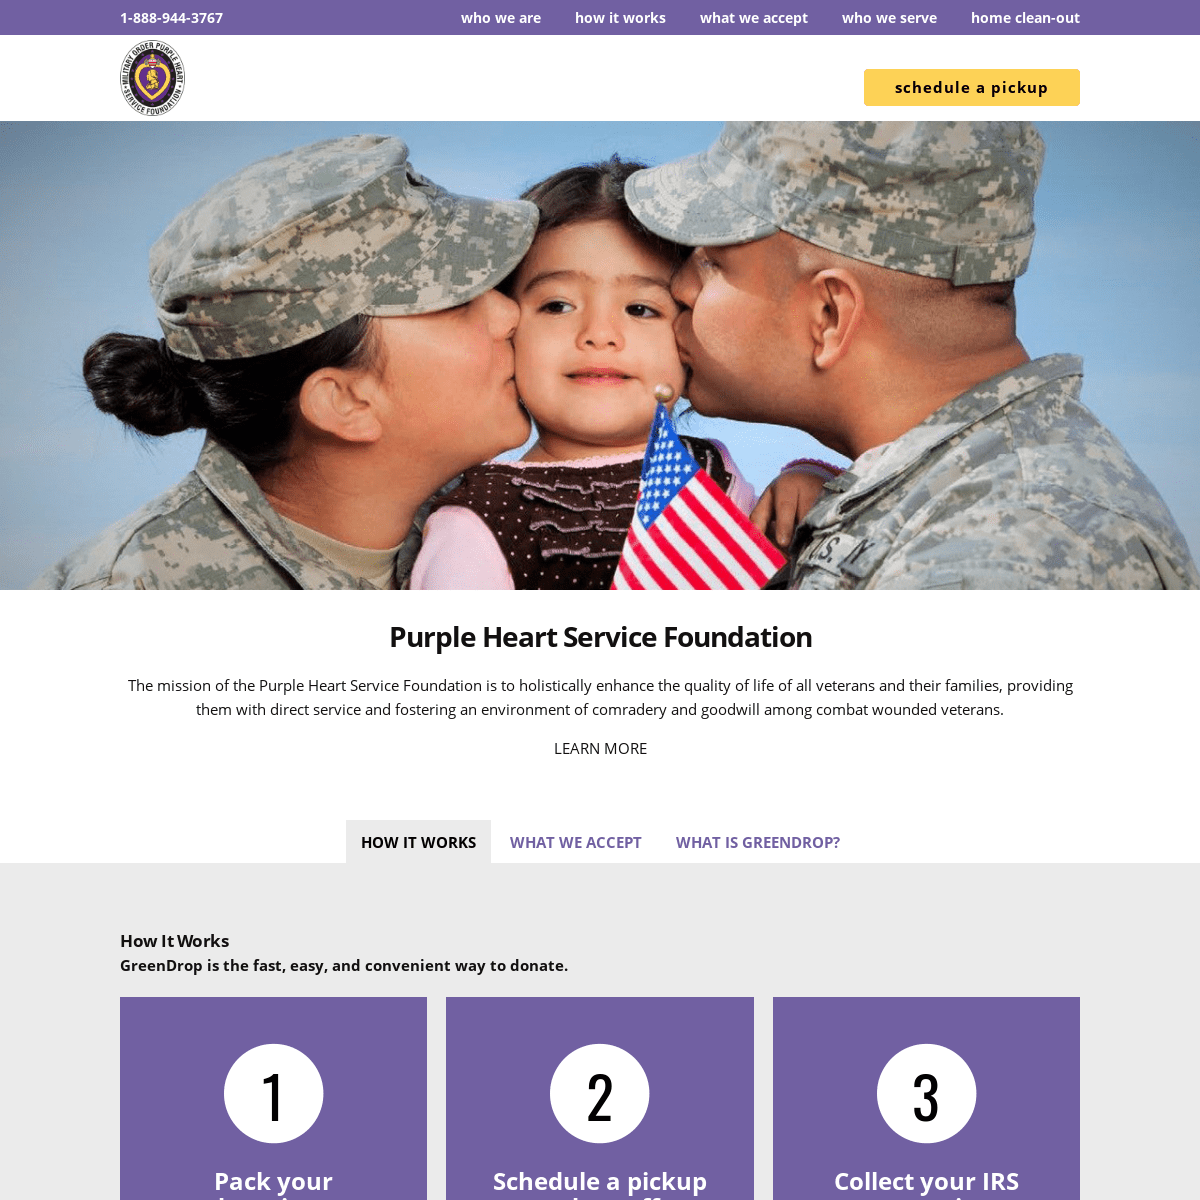 A complete backup of https://purpleheartpickup.org